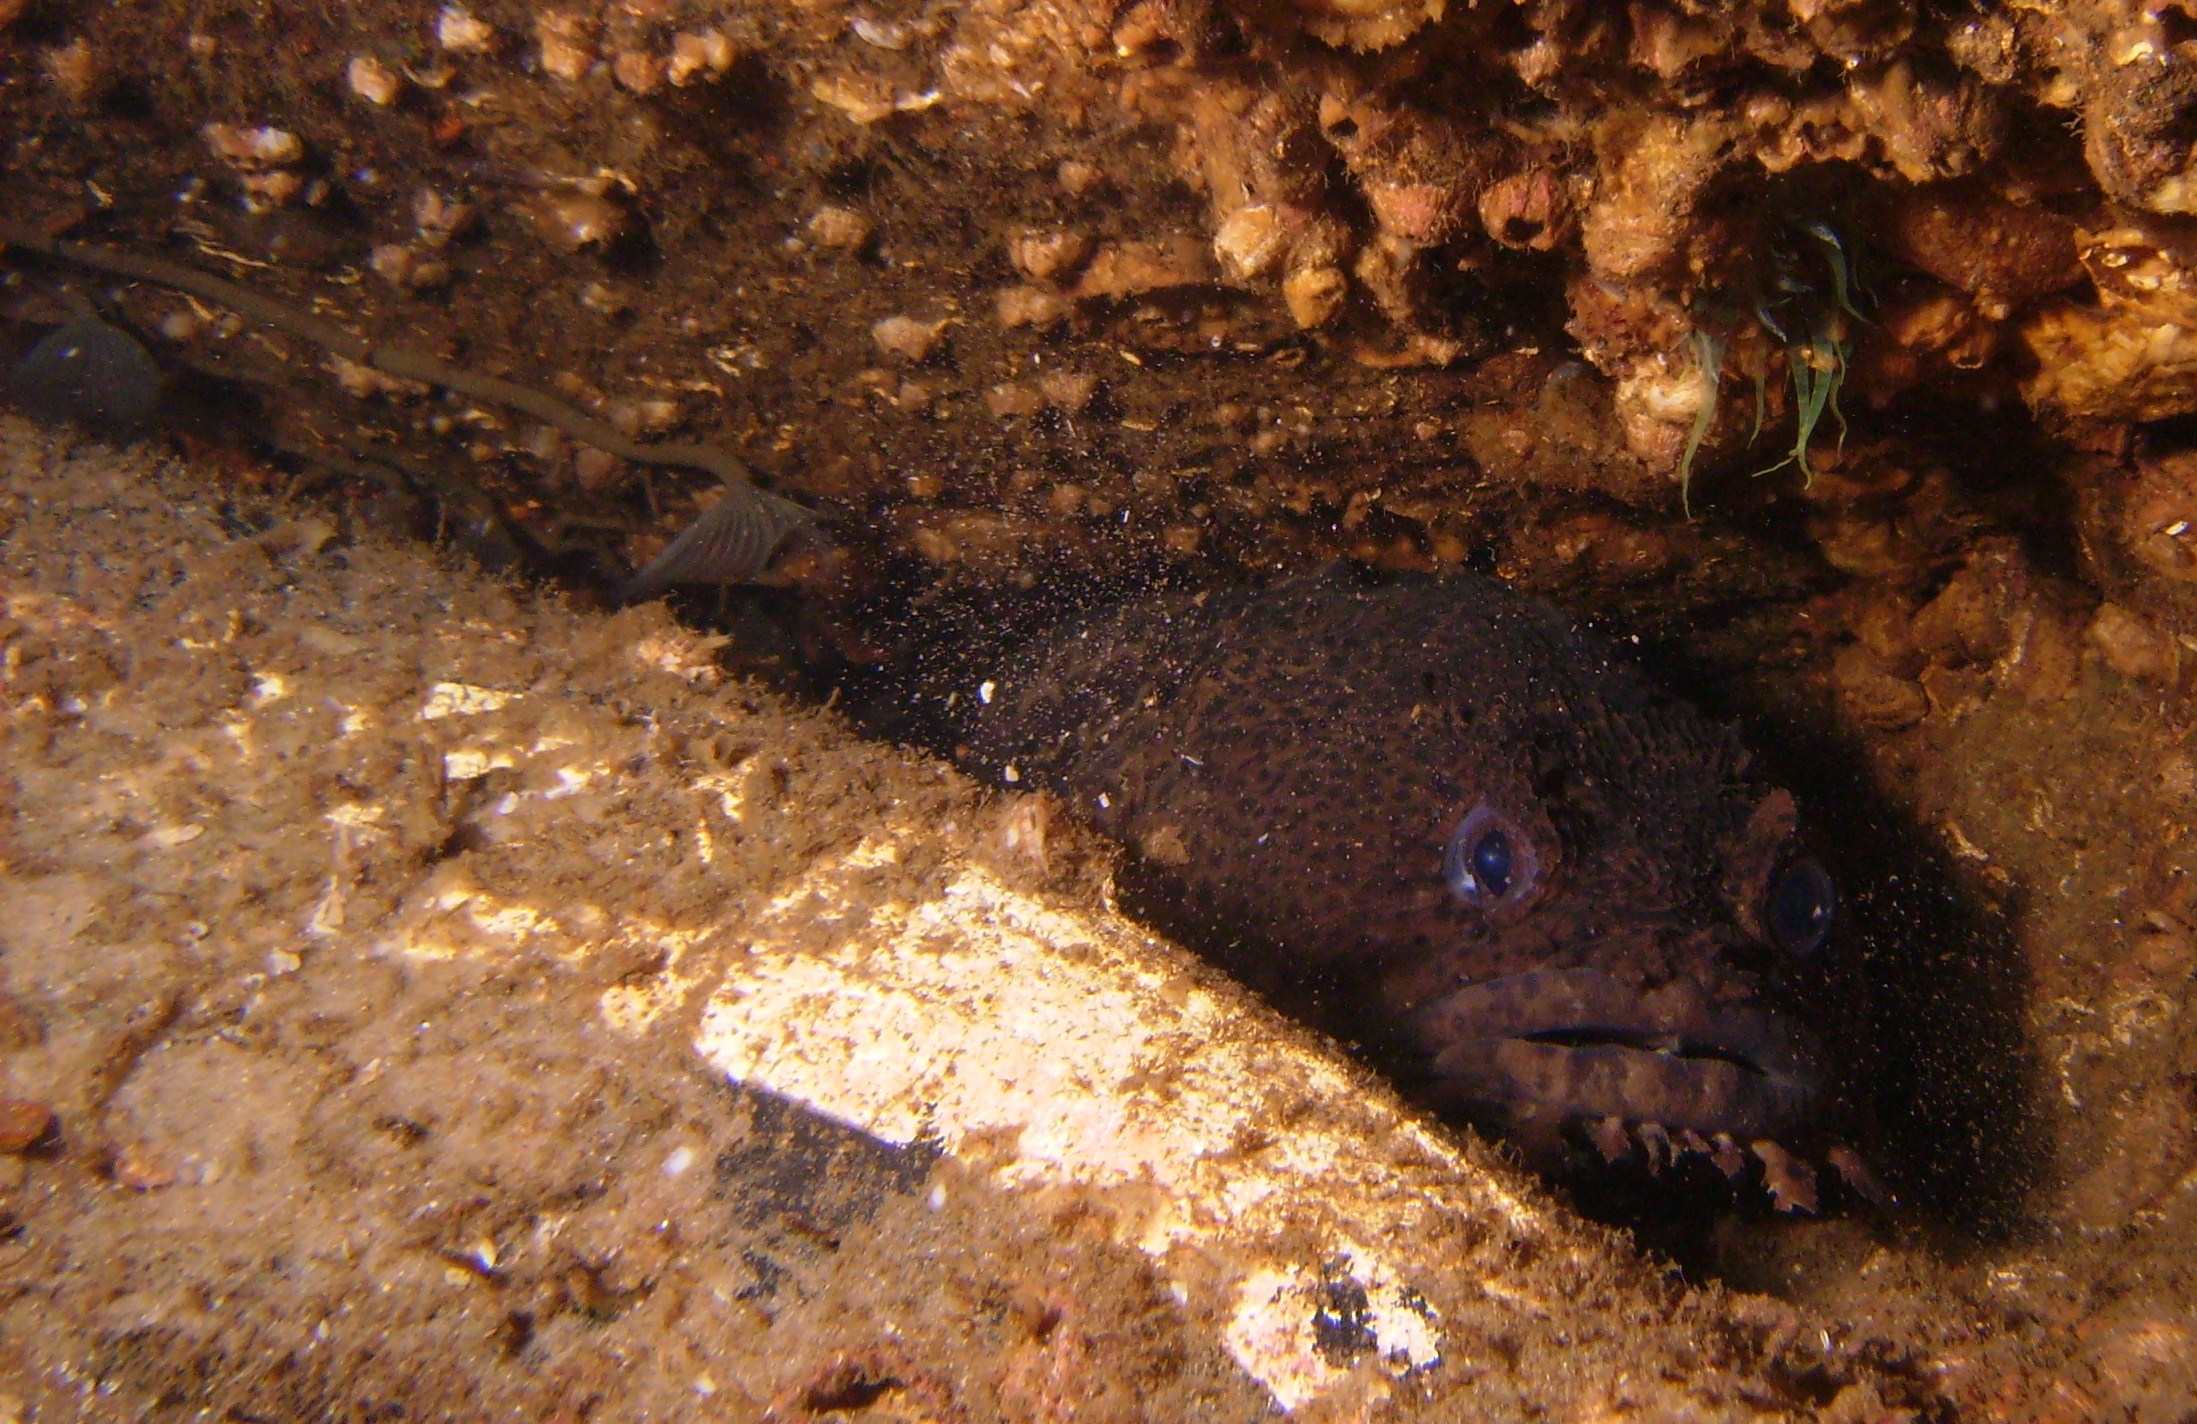 Second of two toadfish at the coal barges